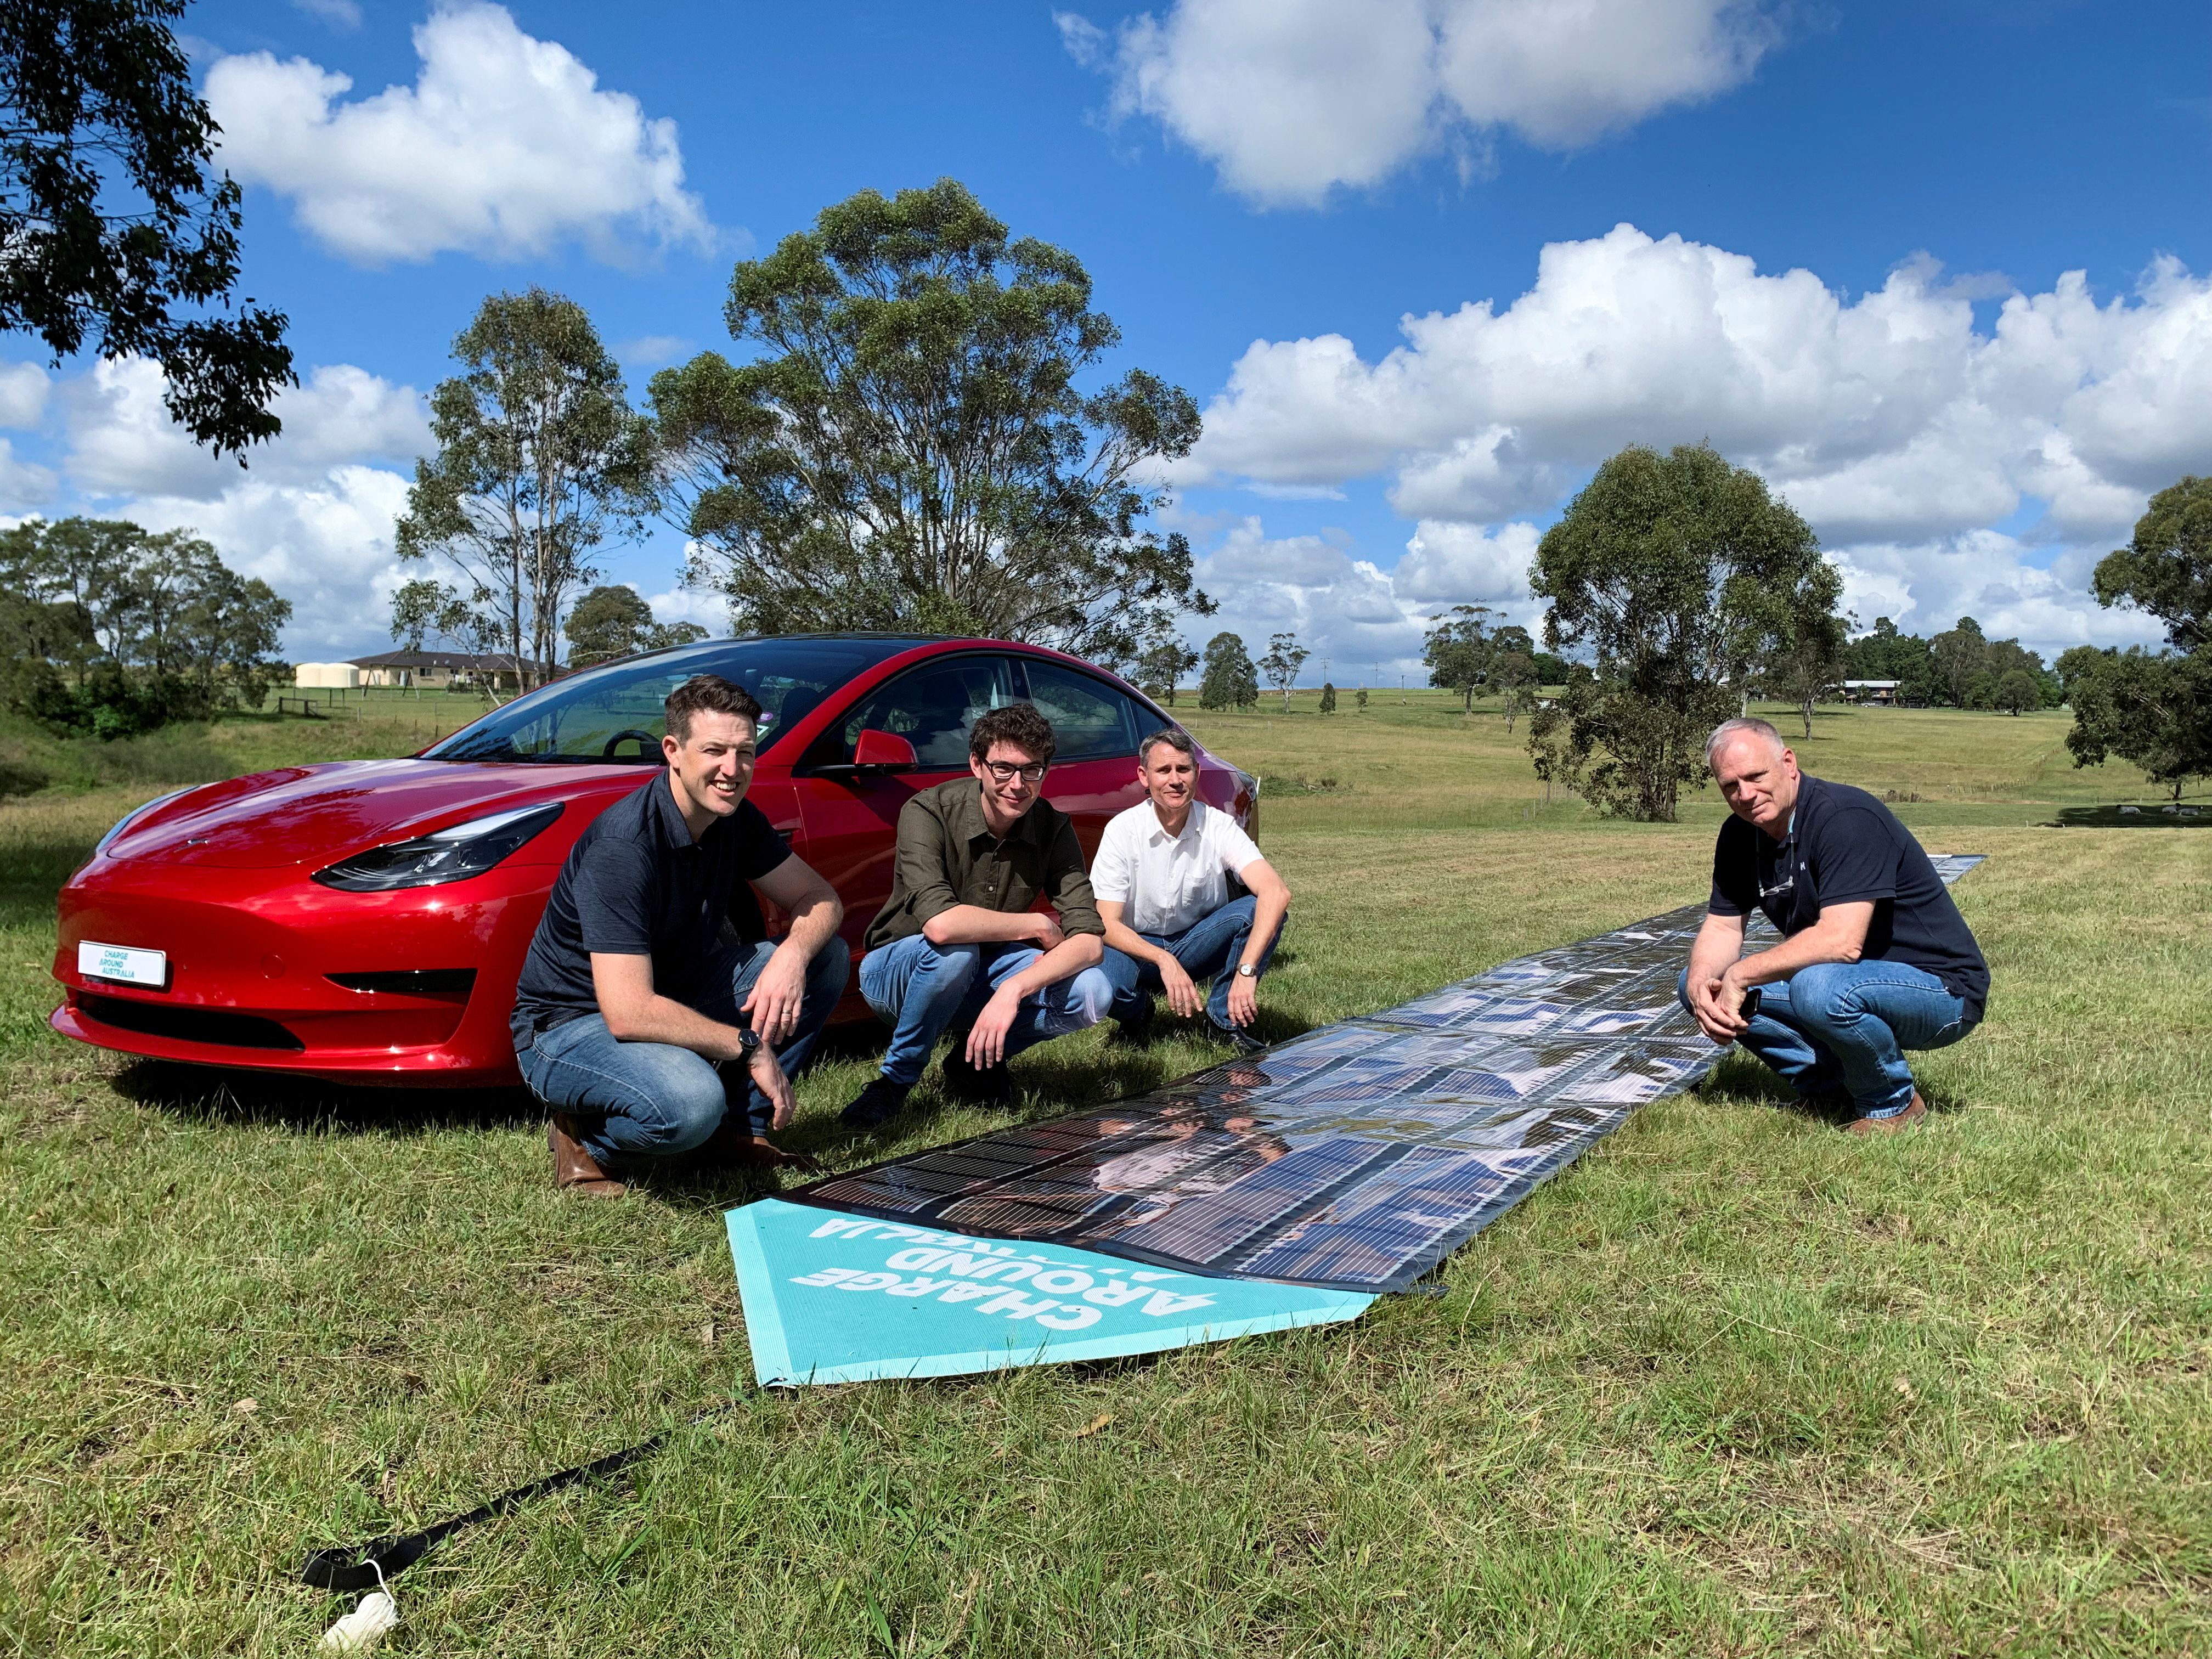 Charge Around Australia project lead and inventor of 'printed solar' panels Paul Dastoor and team members next to a printed solar panel and Tesla car, in Gosforth